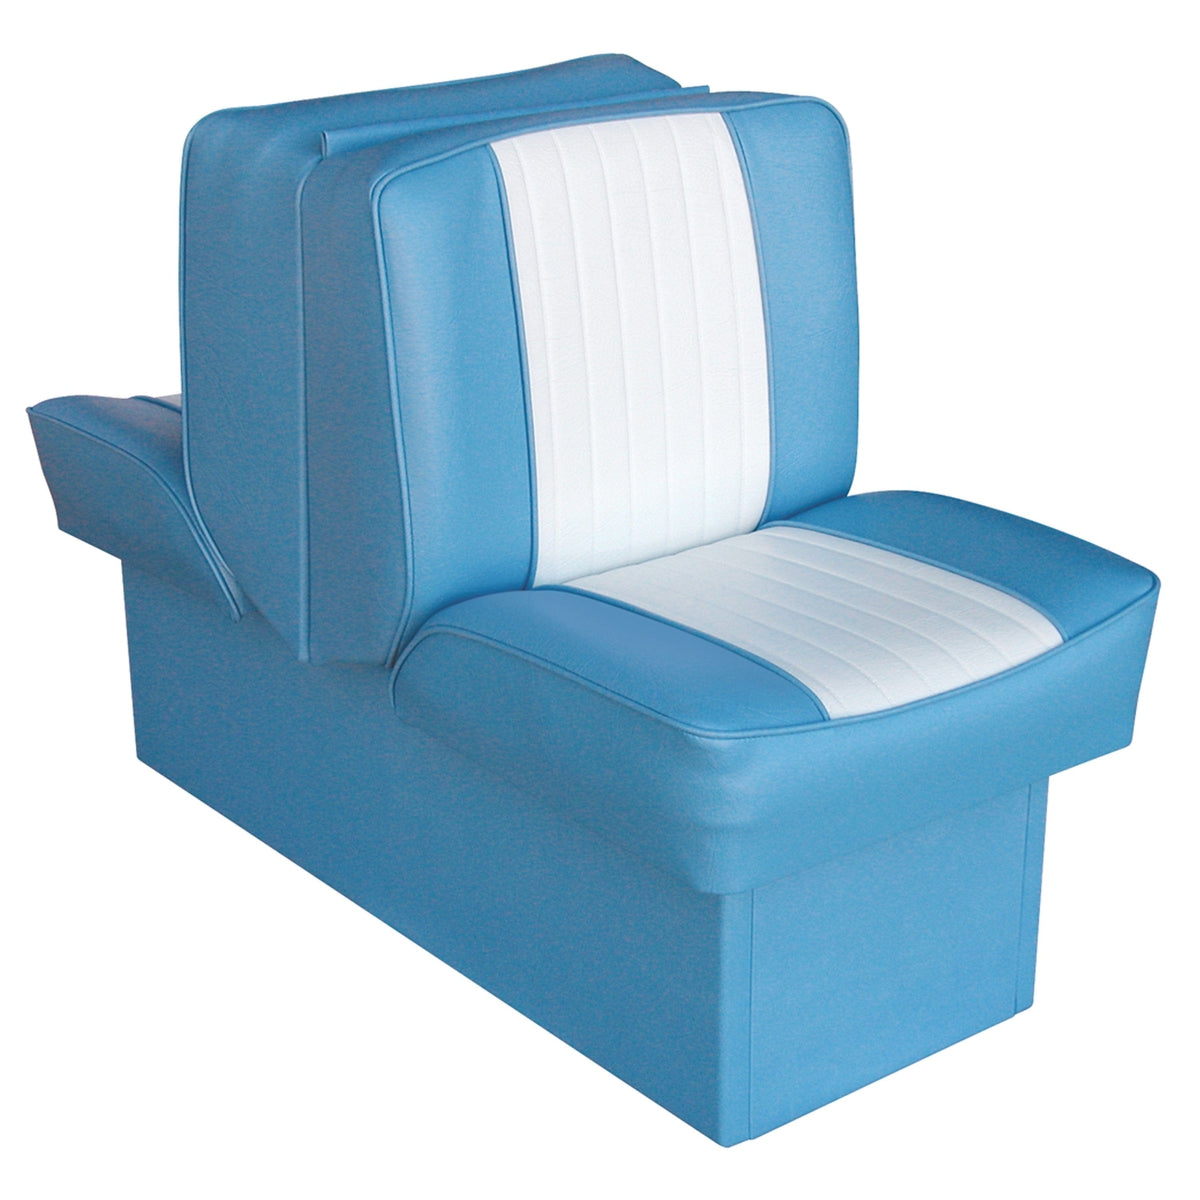 Wise Oversized - Not Qualified for Free Shipping Wise Lounge Seat Deluxe Runner Light blue/White #8WD707P-1-663